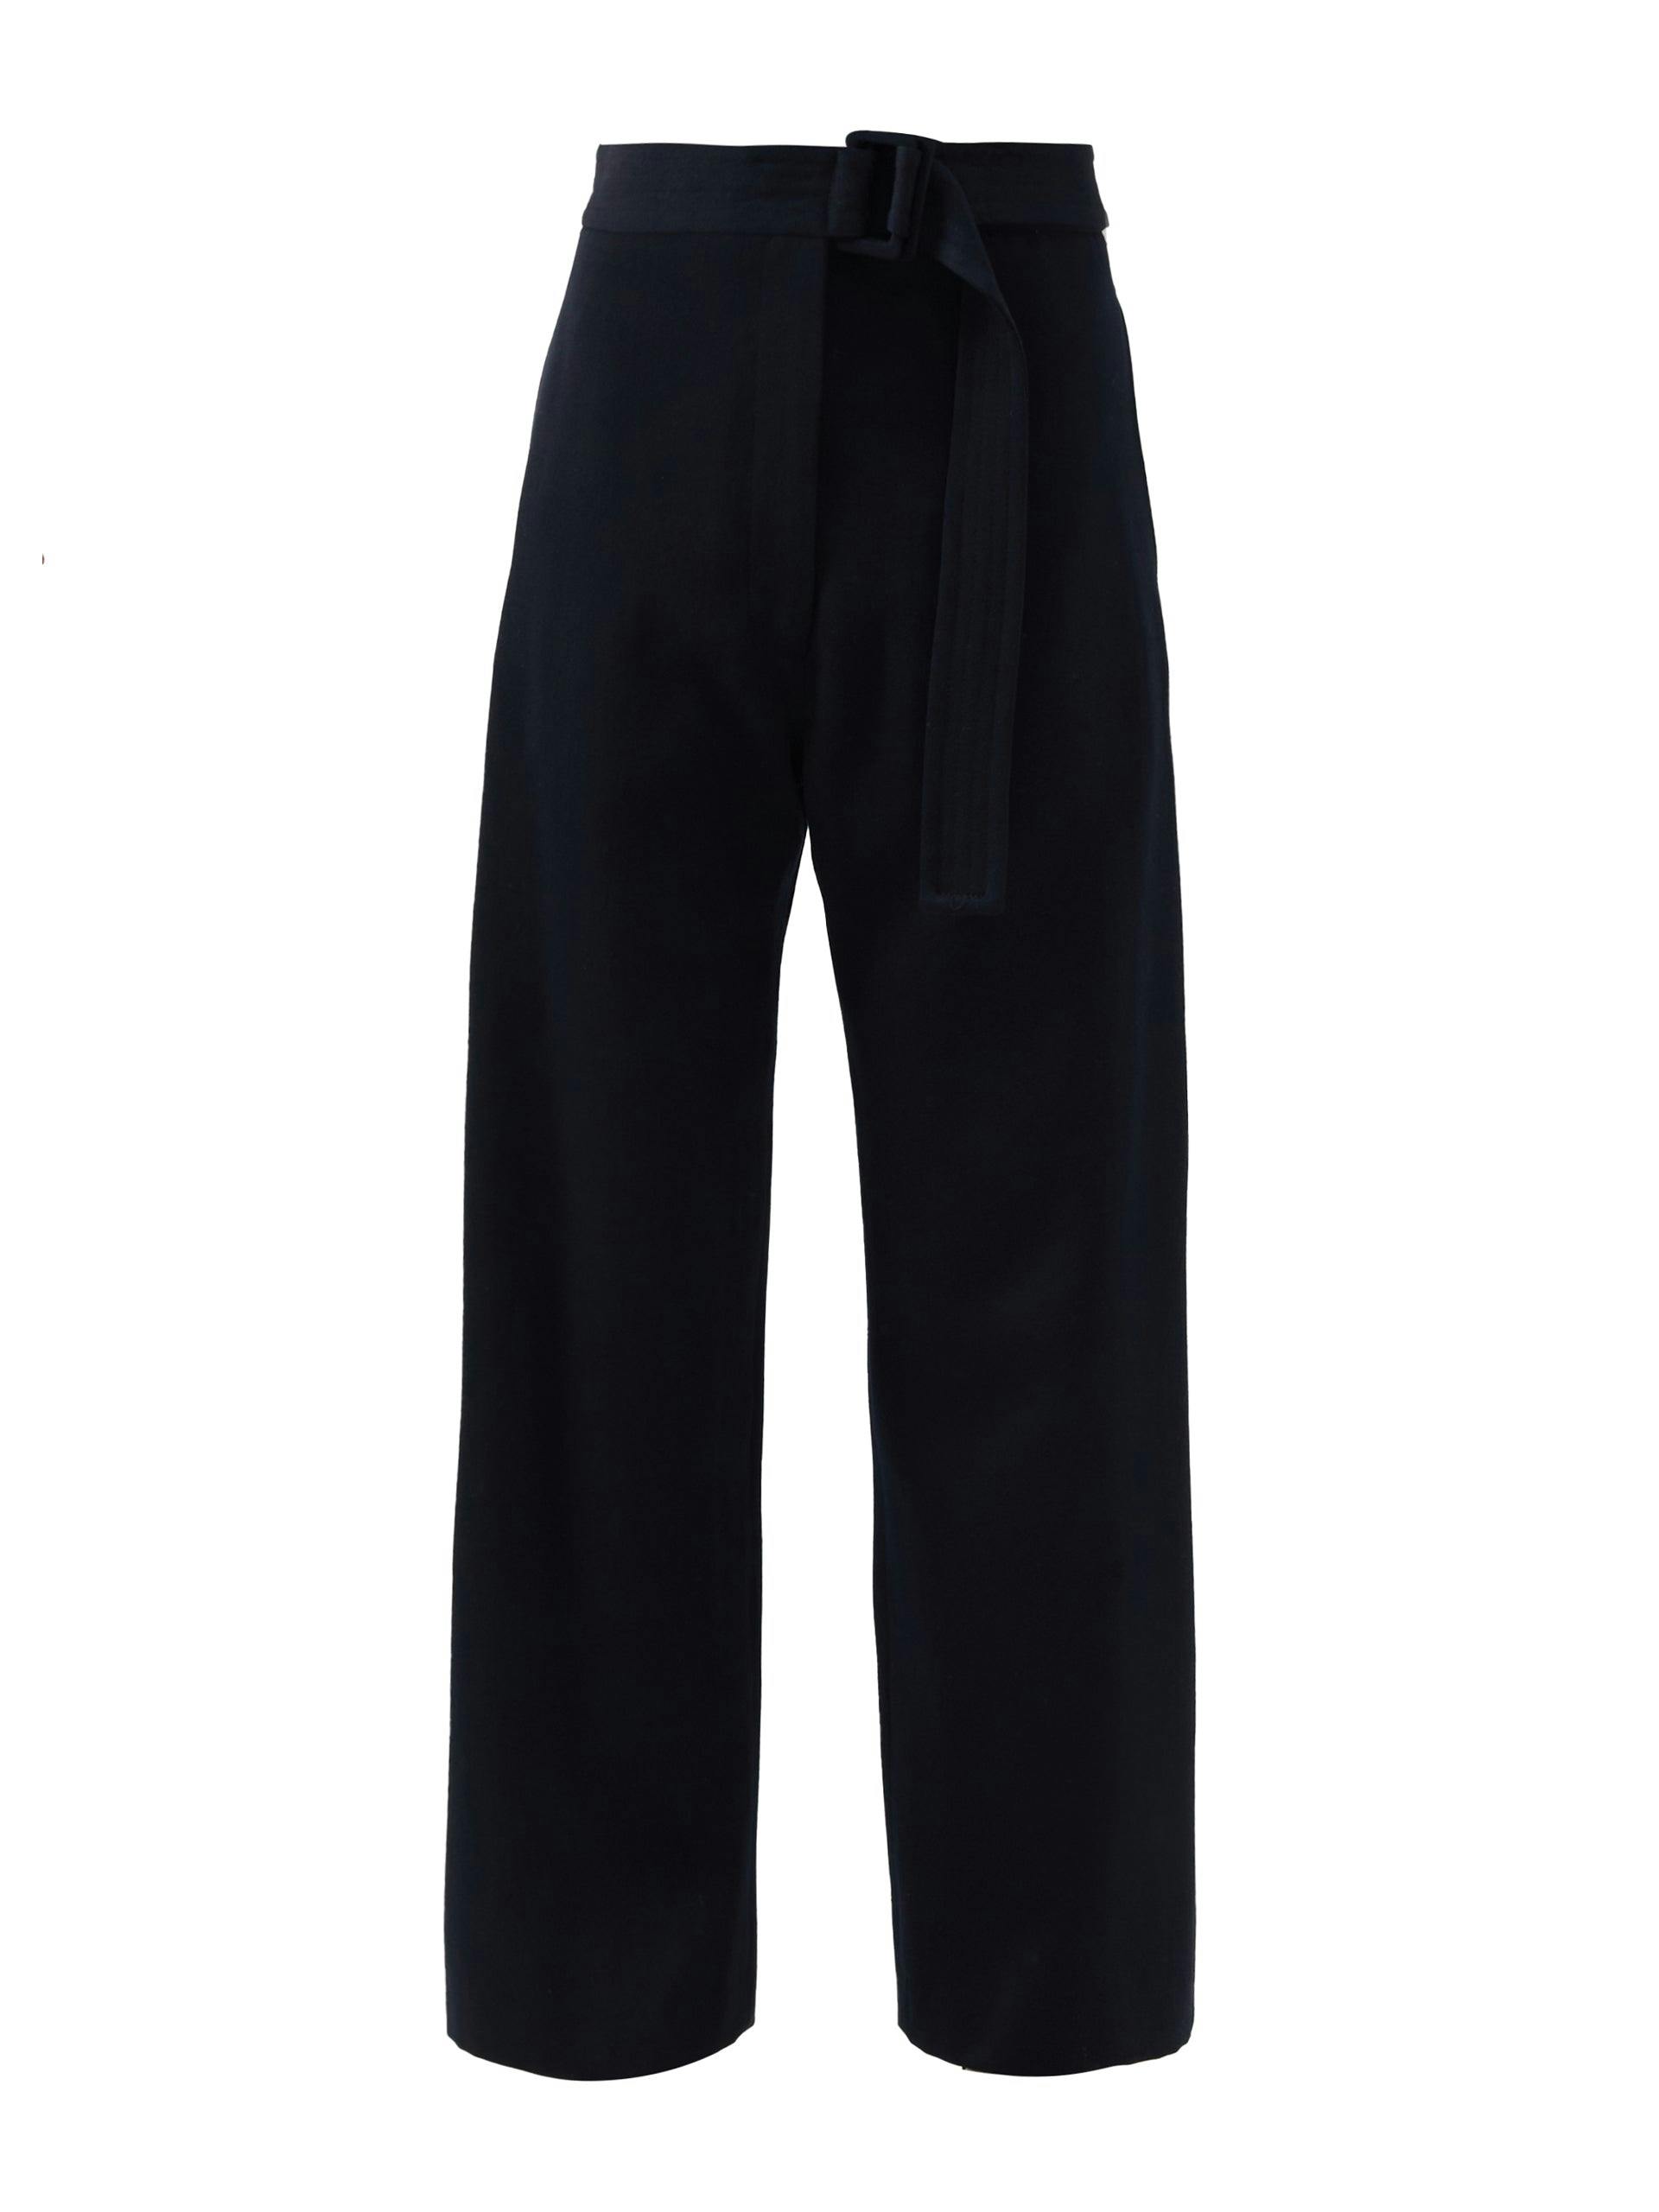 Belted tailored navy trousers